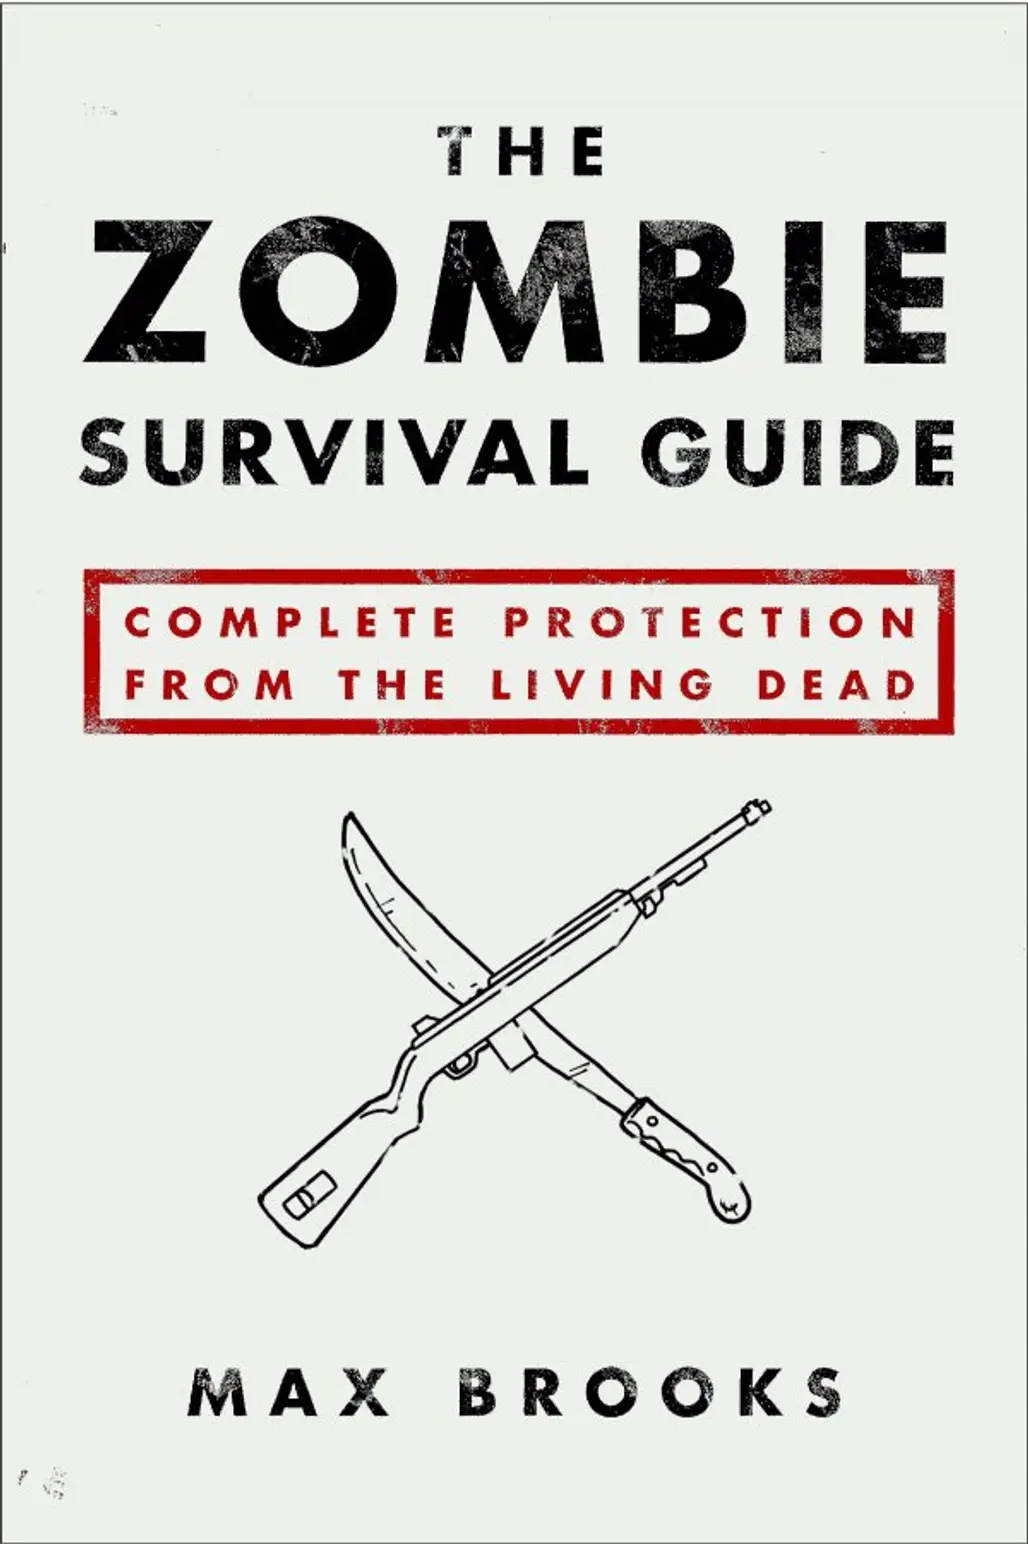 The Zombie Survival Guide: Complete Protection from the Living Dead by Max Brooks